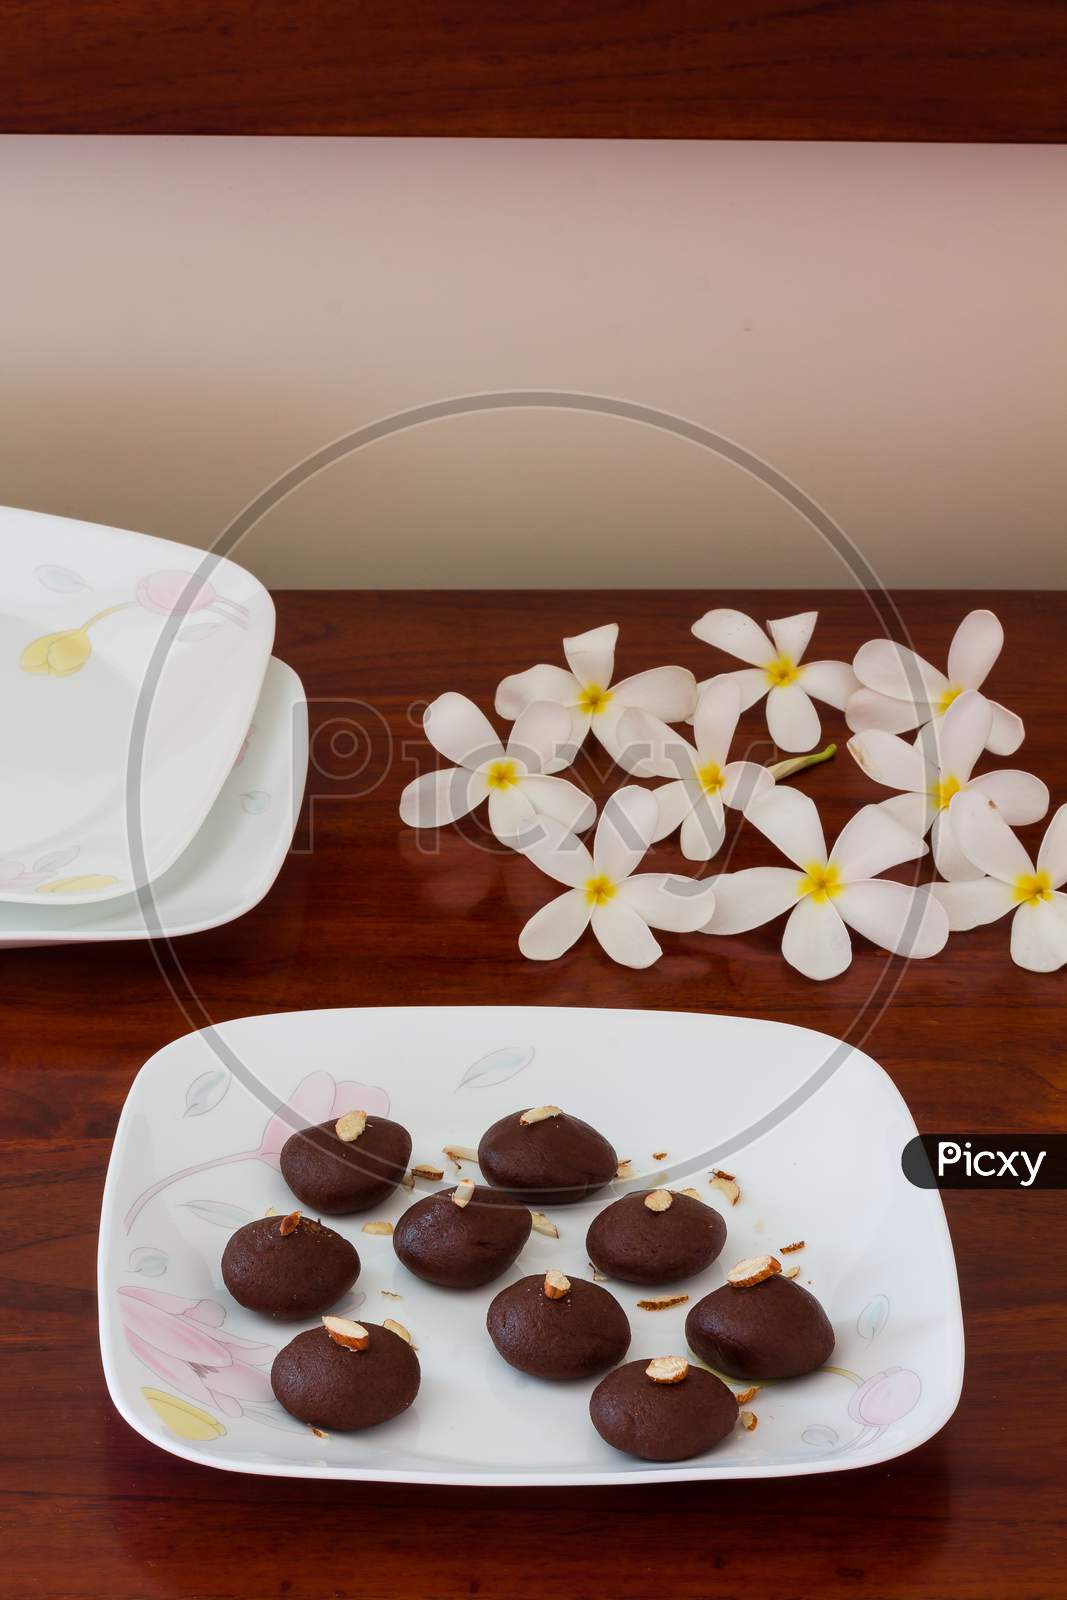 Top view of dark chocolate truffle or cocoa balls or pralines or candies,isolated on dark wooden background with Frangipani flowers.